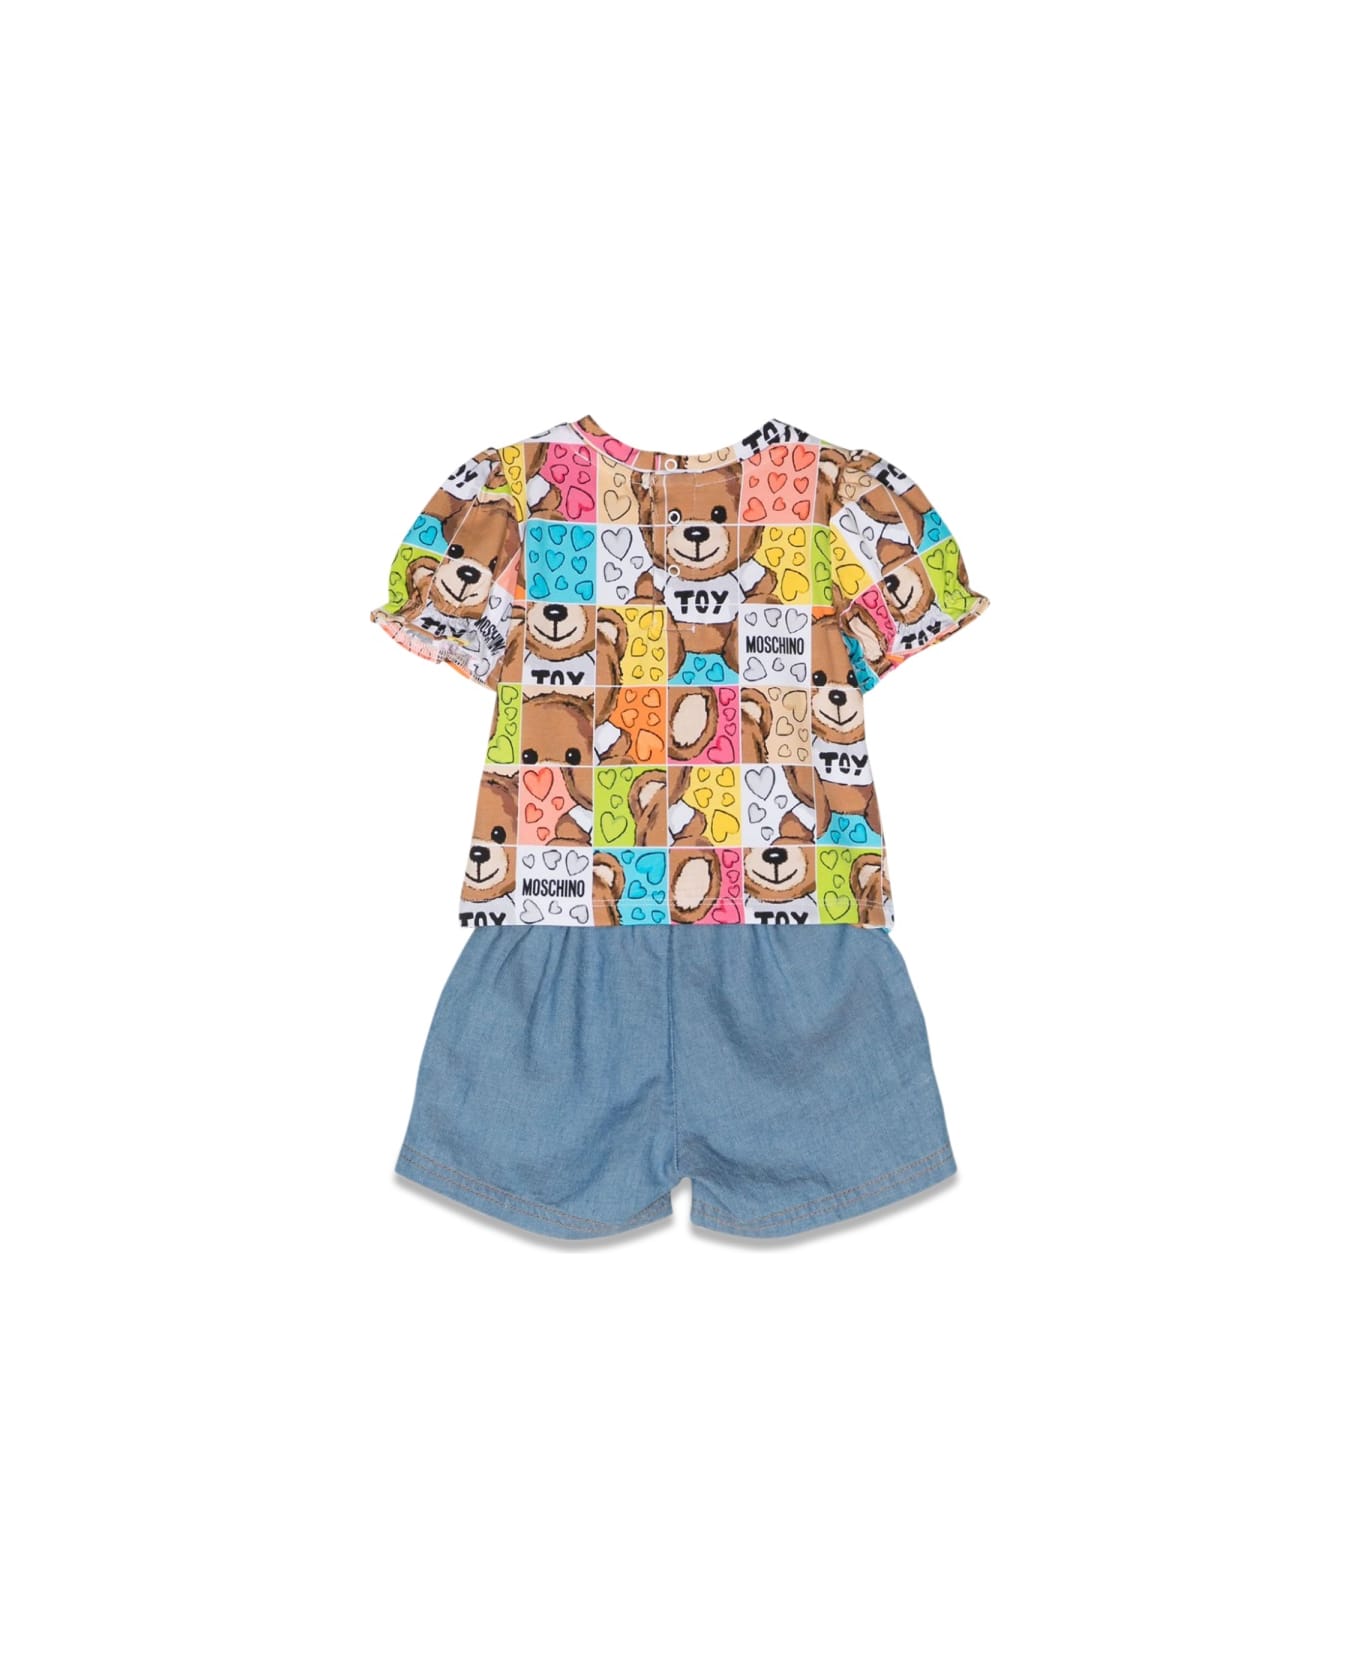 Moschino T-shirt And Shortsset - MULTICOLOUR アクセサリー＆ギフト